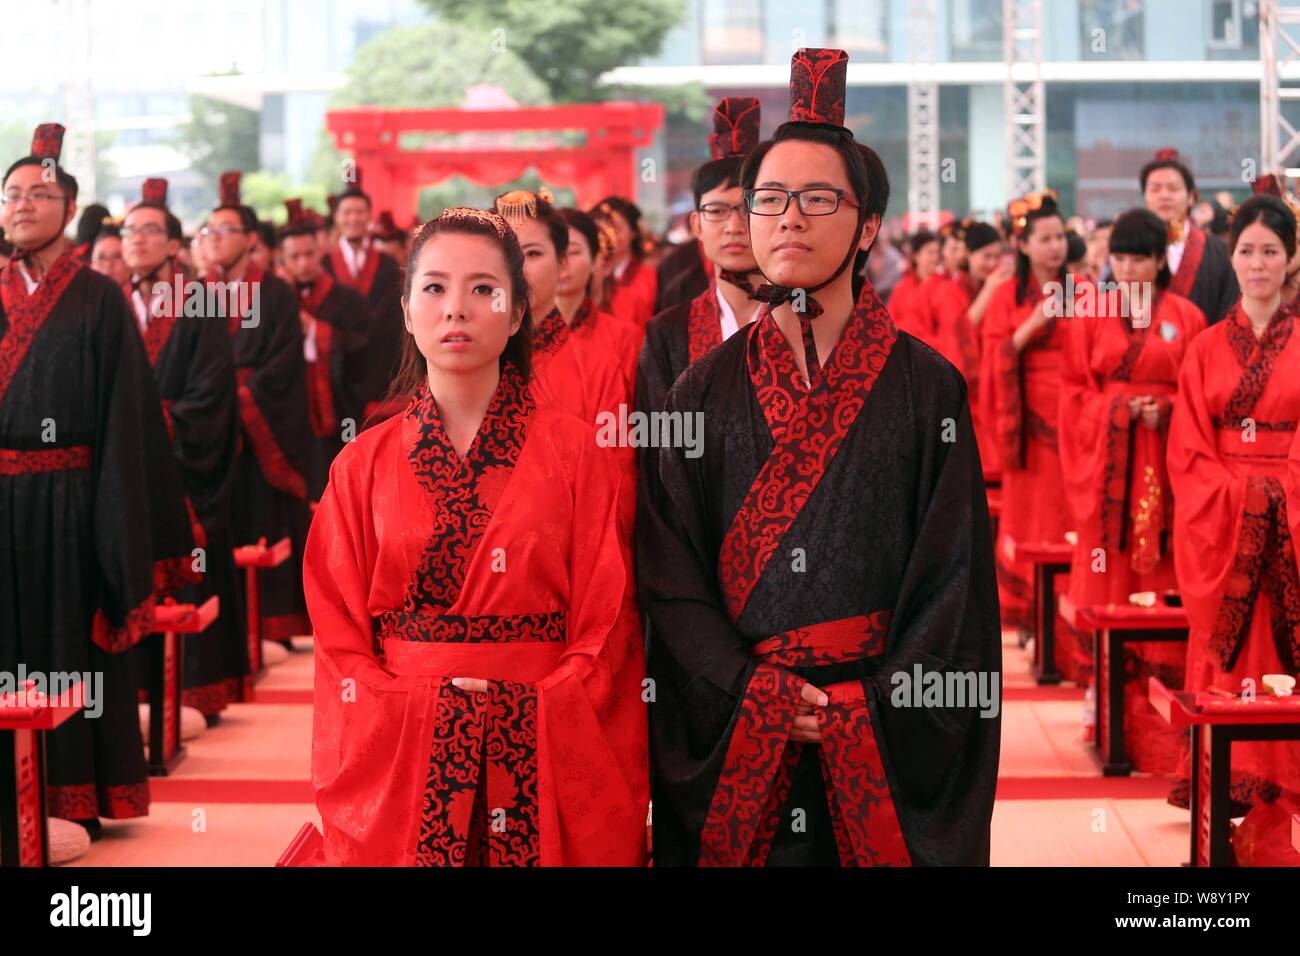 traditional chinese male wedding clothing